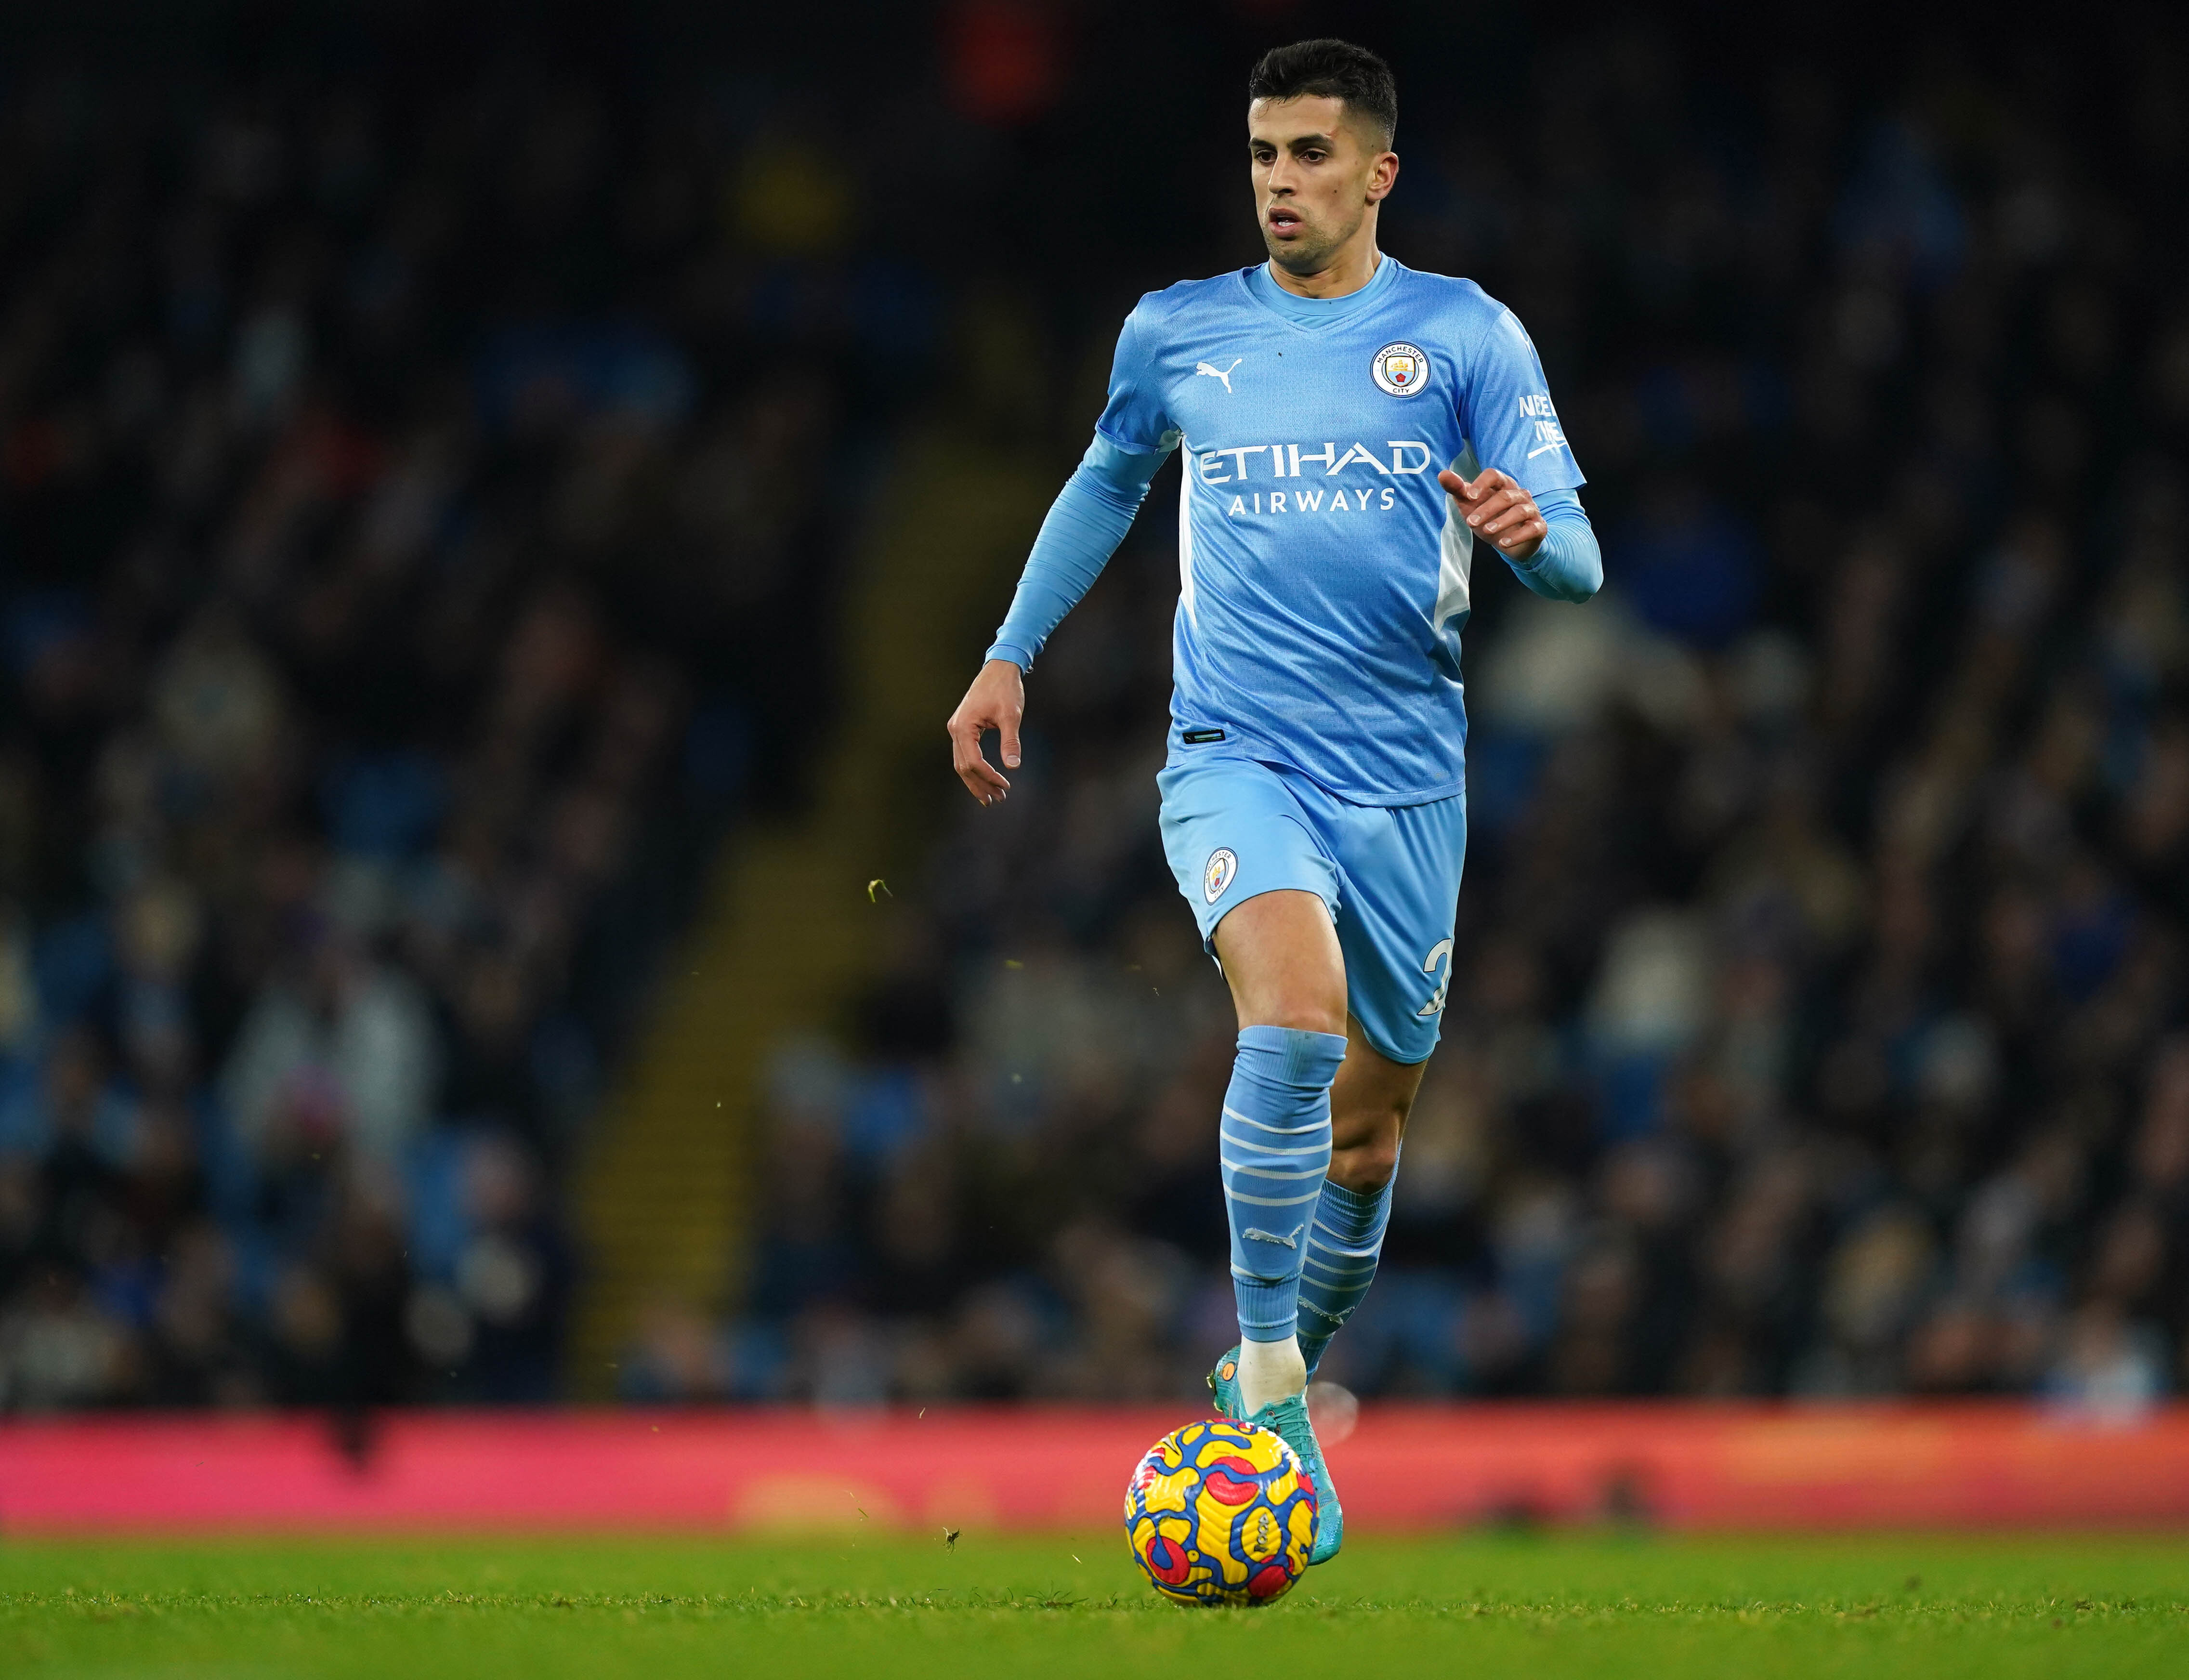 Manchester City’s Joao Cancelo during the Premier League match at the Etihad Stadium, Manchester. Picture date: Saturday February 19, 2022